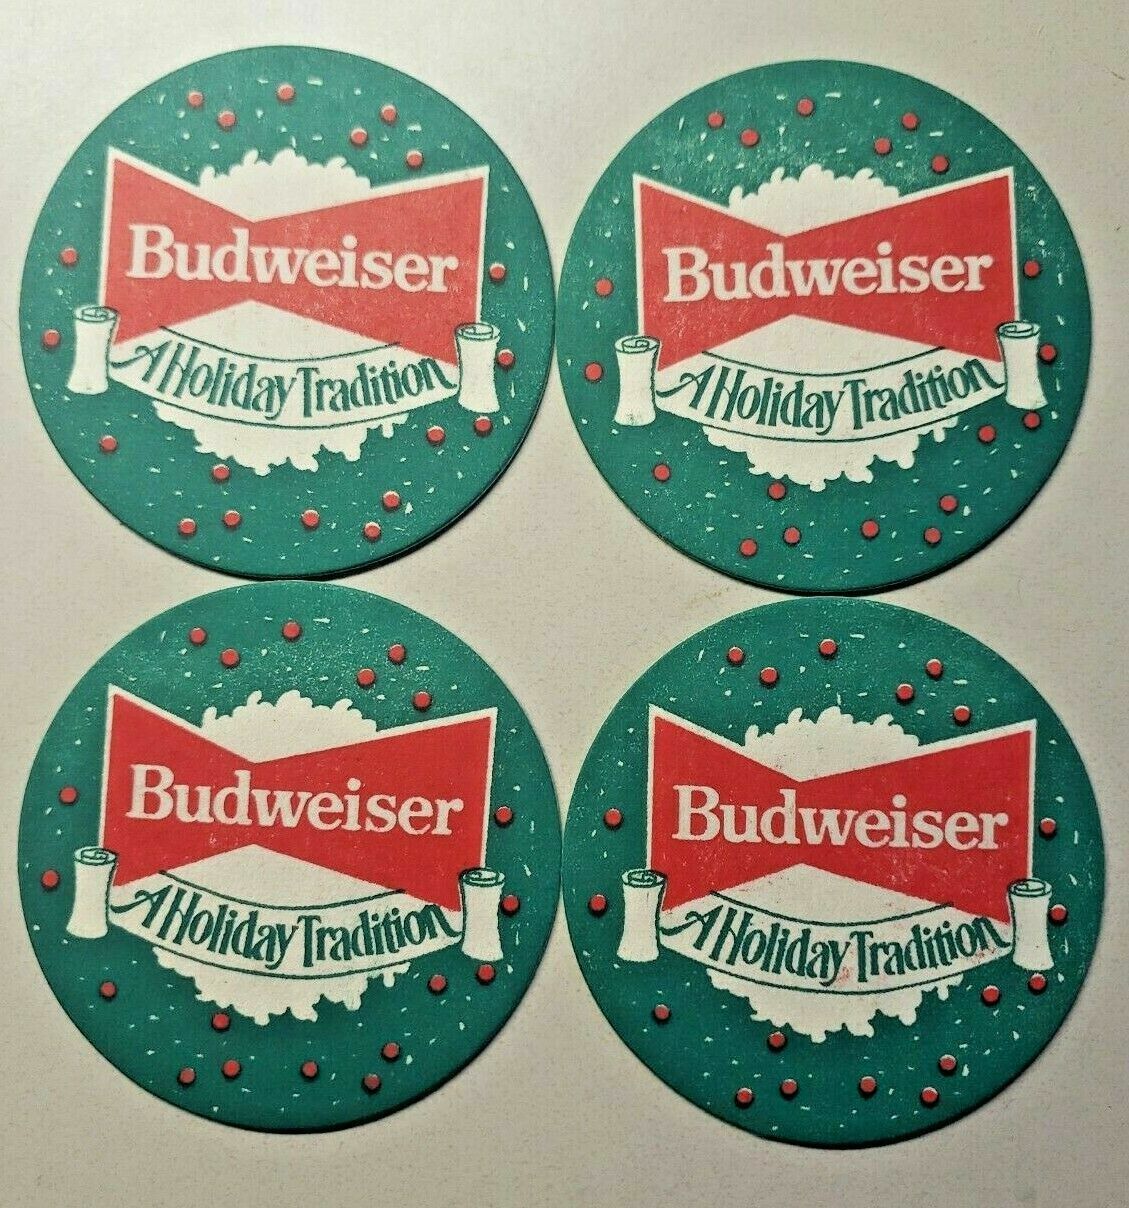 Vintage 1950s Budweiser Beer Set of 4 Holiday Coaster St. Louis, MO 3.5" PB61 - $10.99